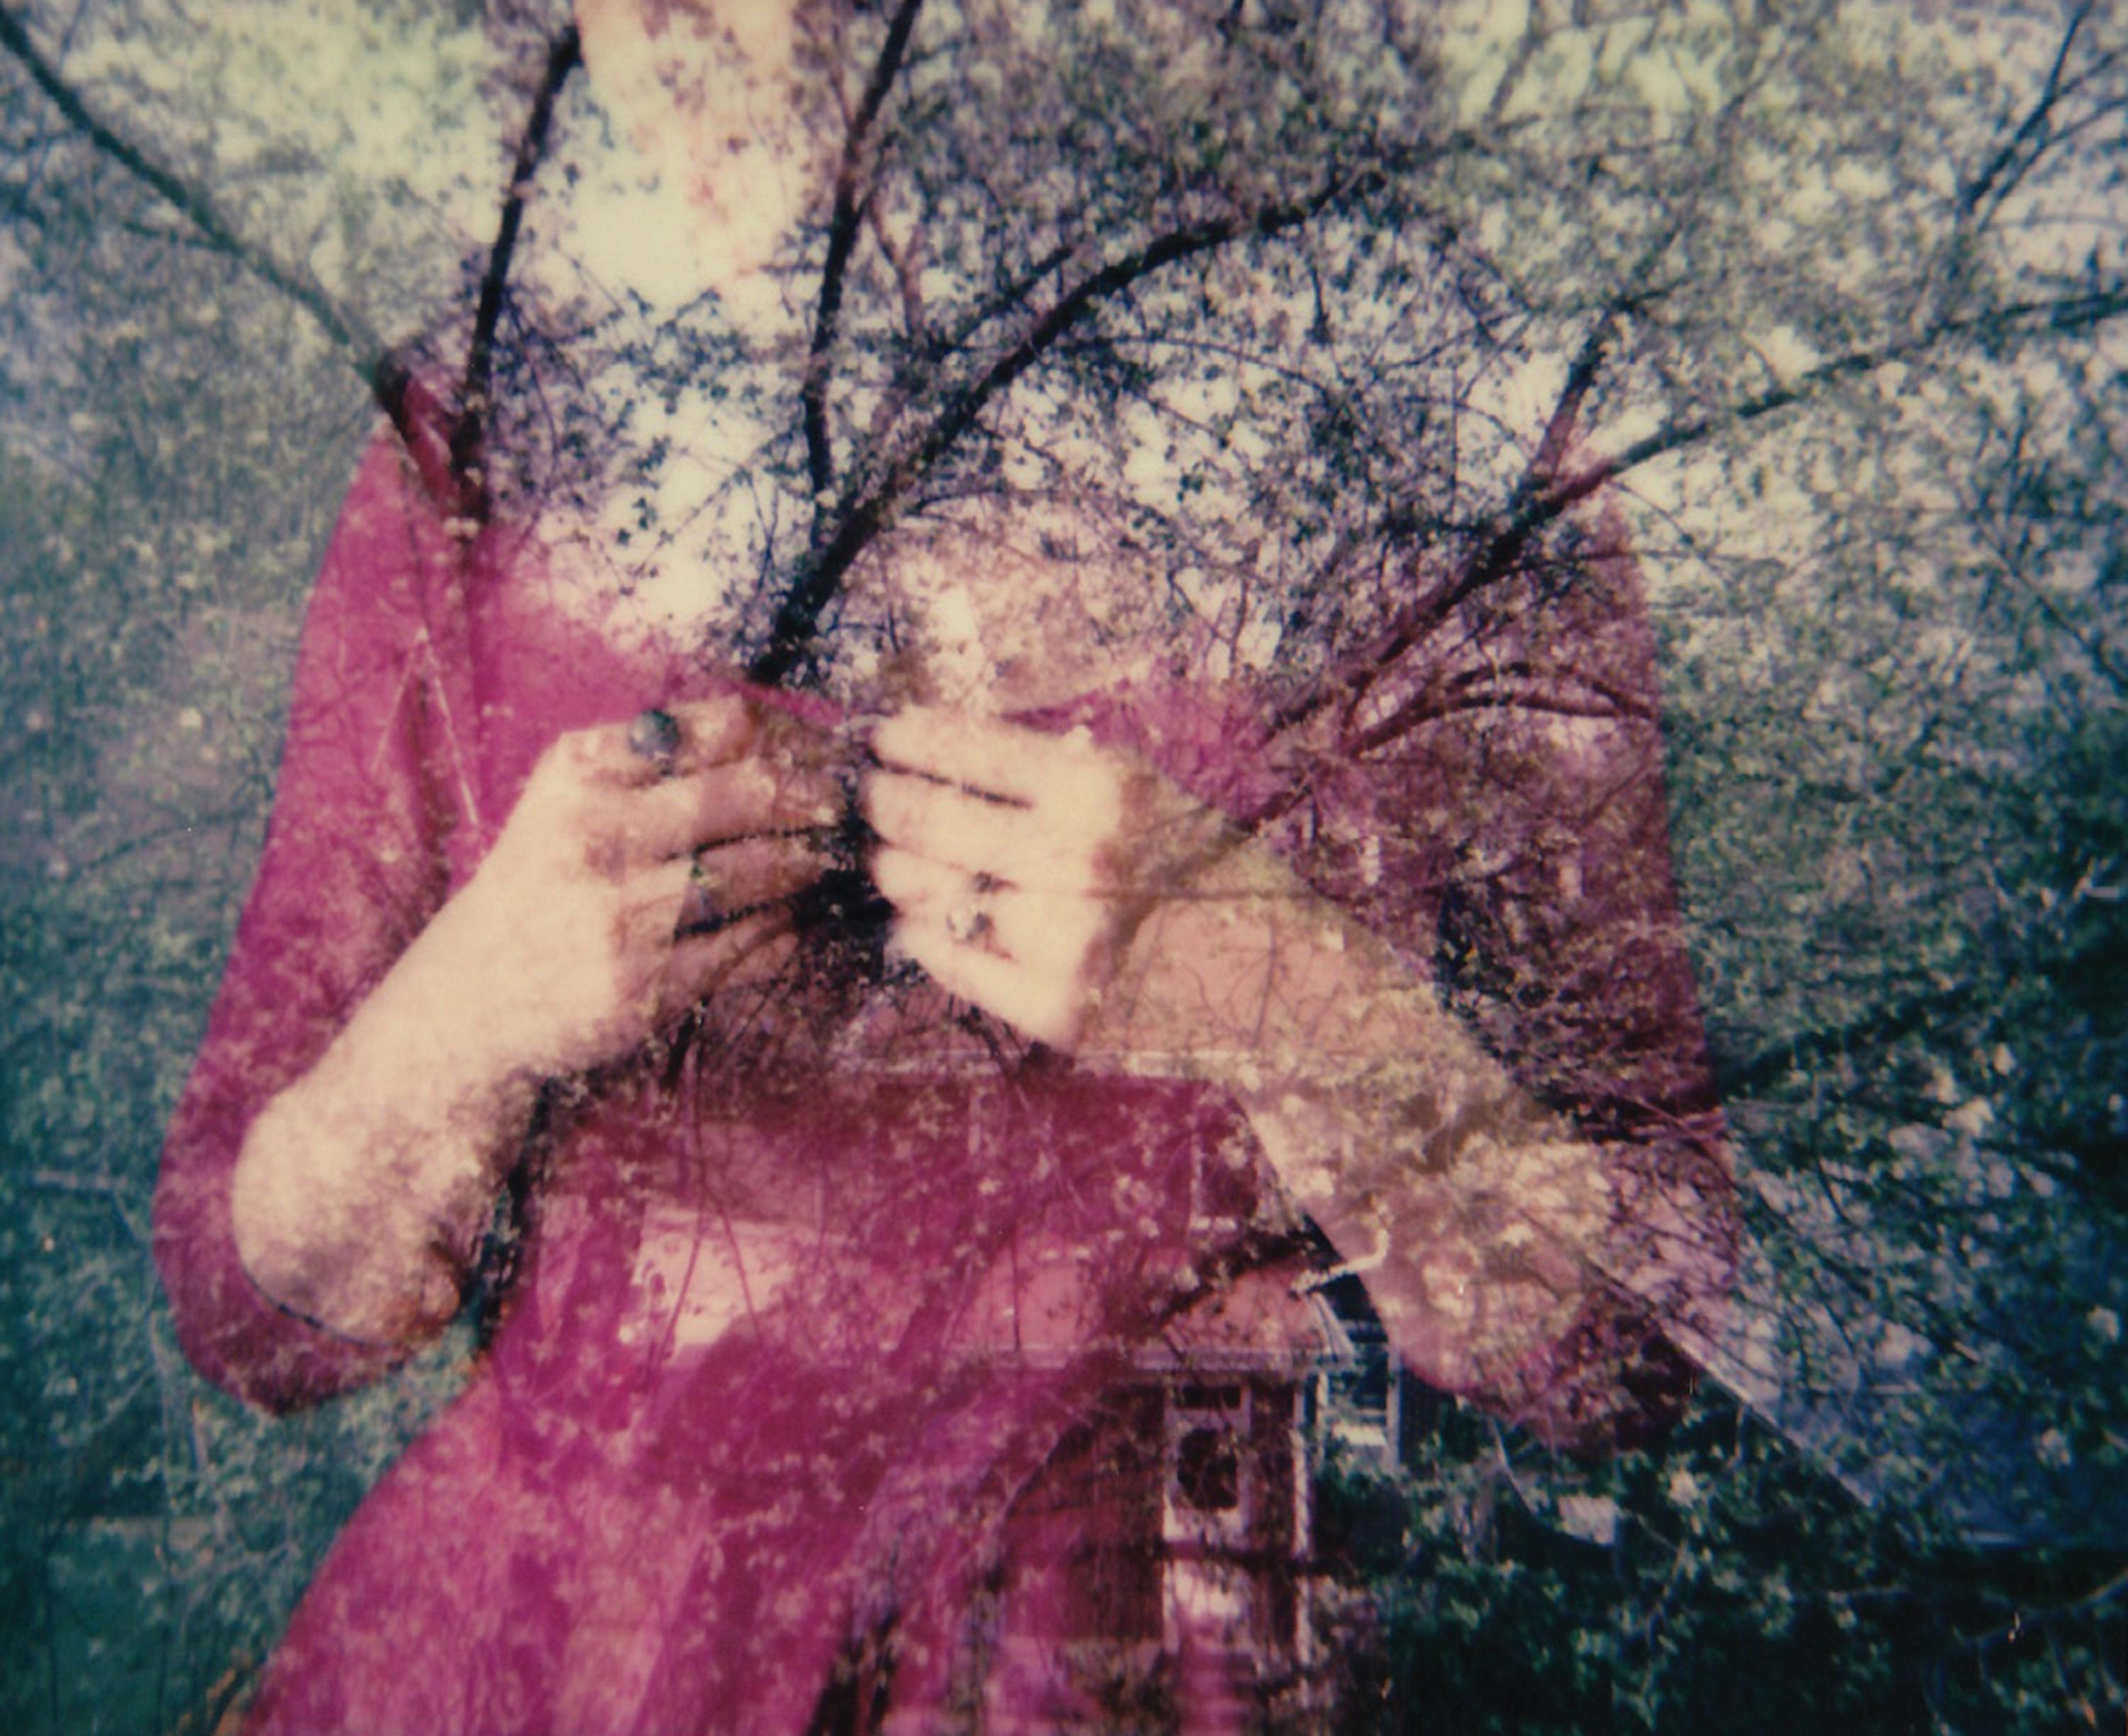 Lisa Toboz Figurative Photograph - The Heart is where the home is - Contemporary, Figurative, Woman, Polaroid